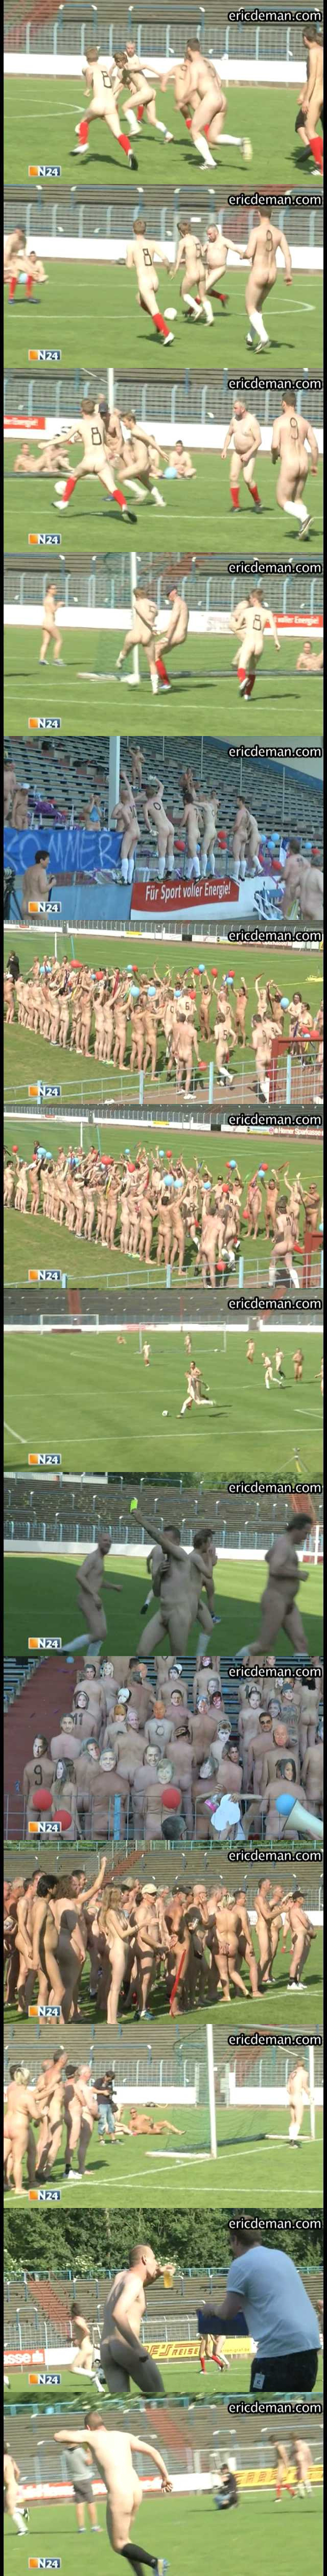 footballer-playing-naked-outdoor